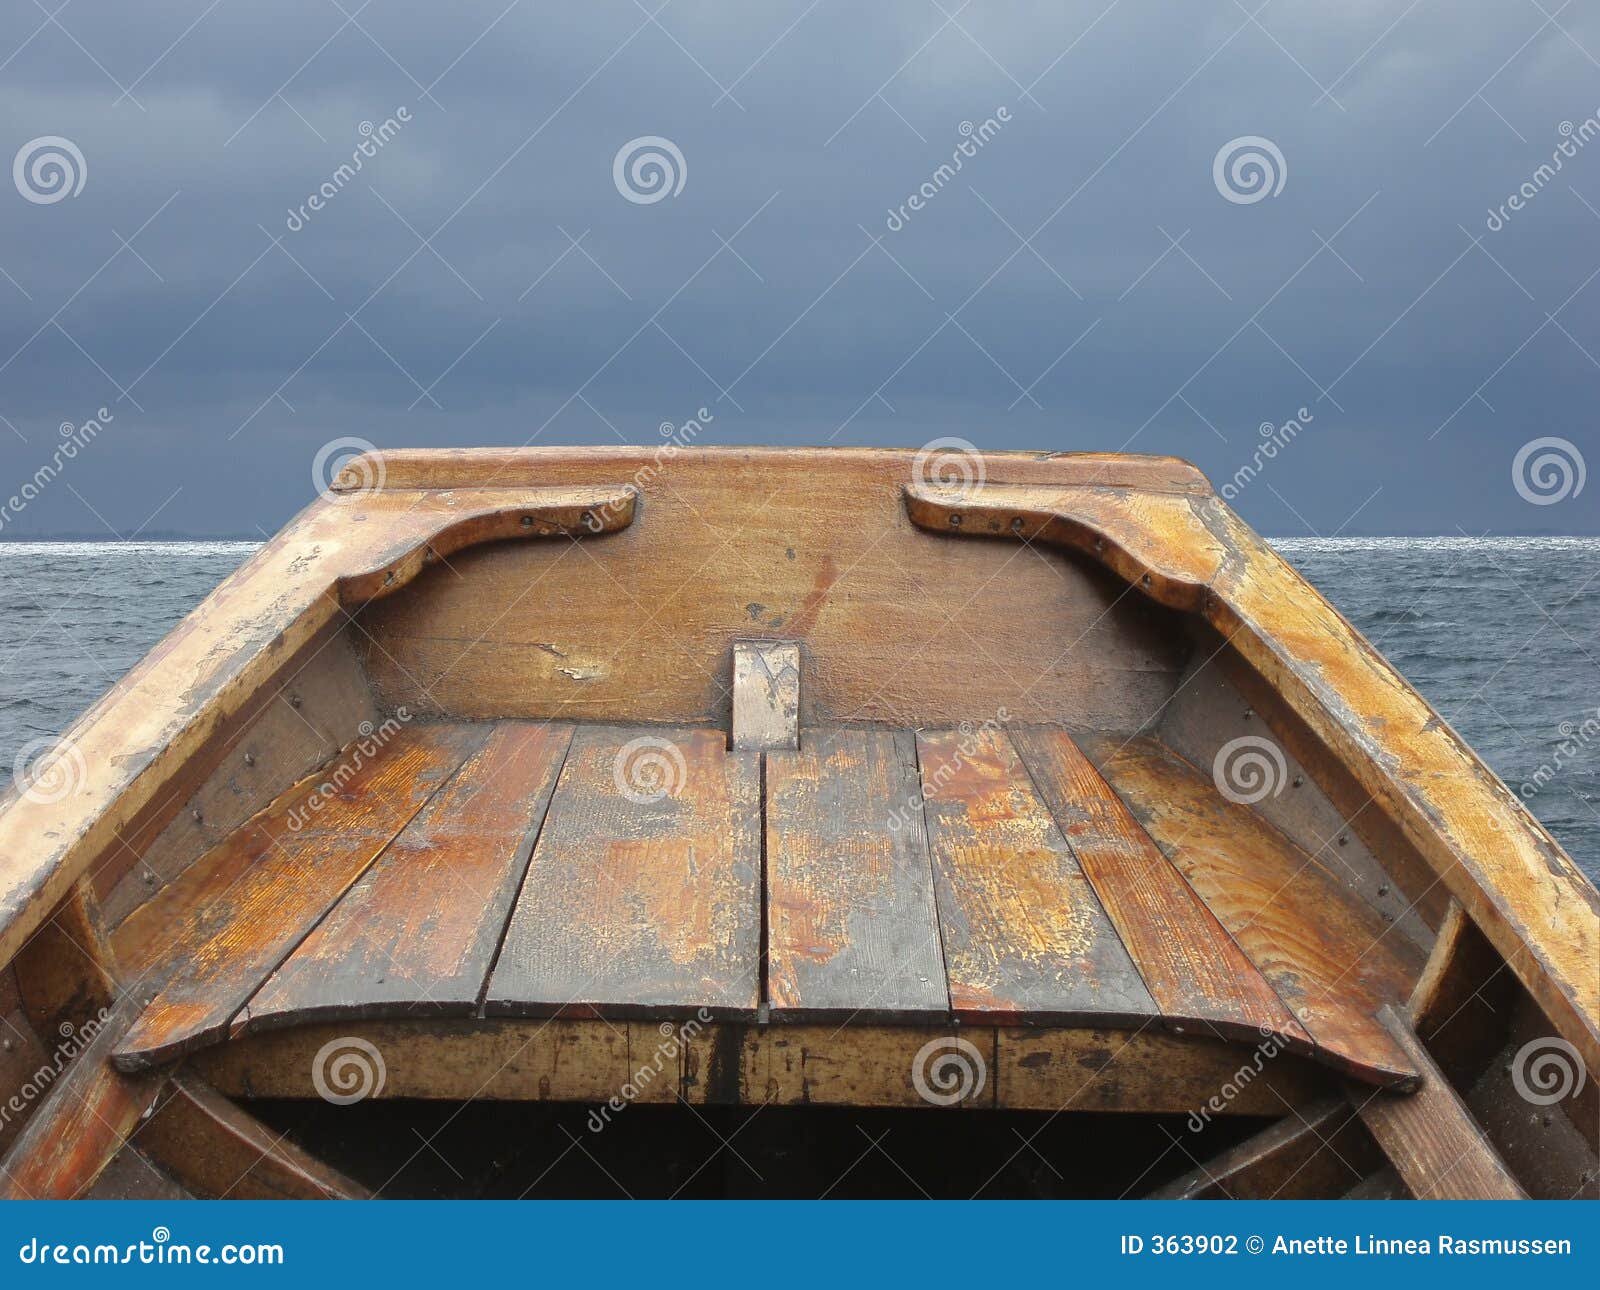 Bow of old rowing boat stock photo. Image of meteorology 